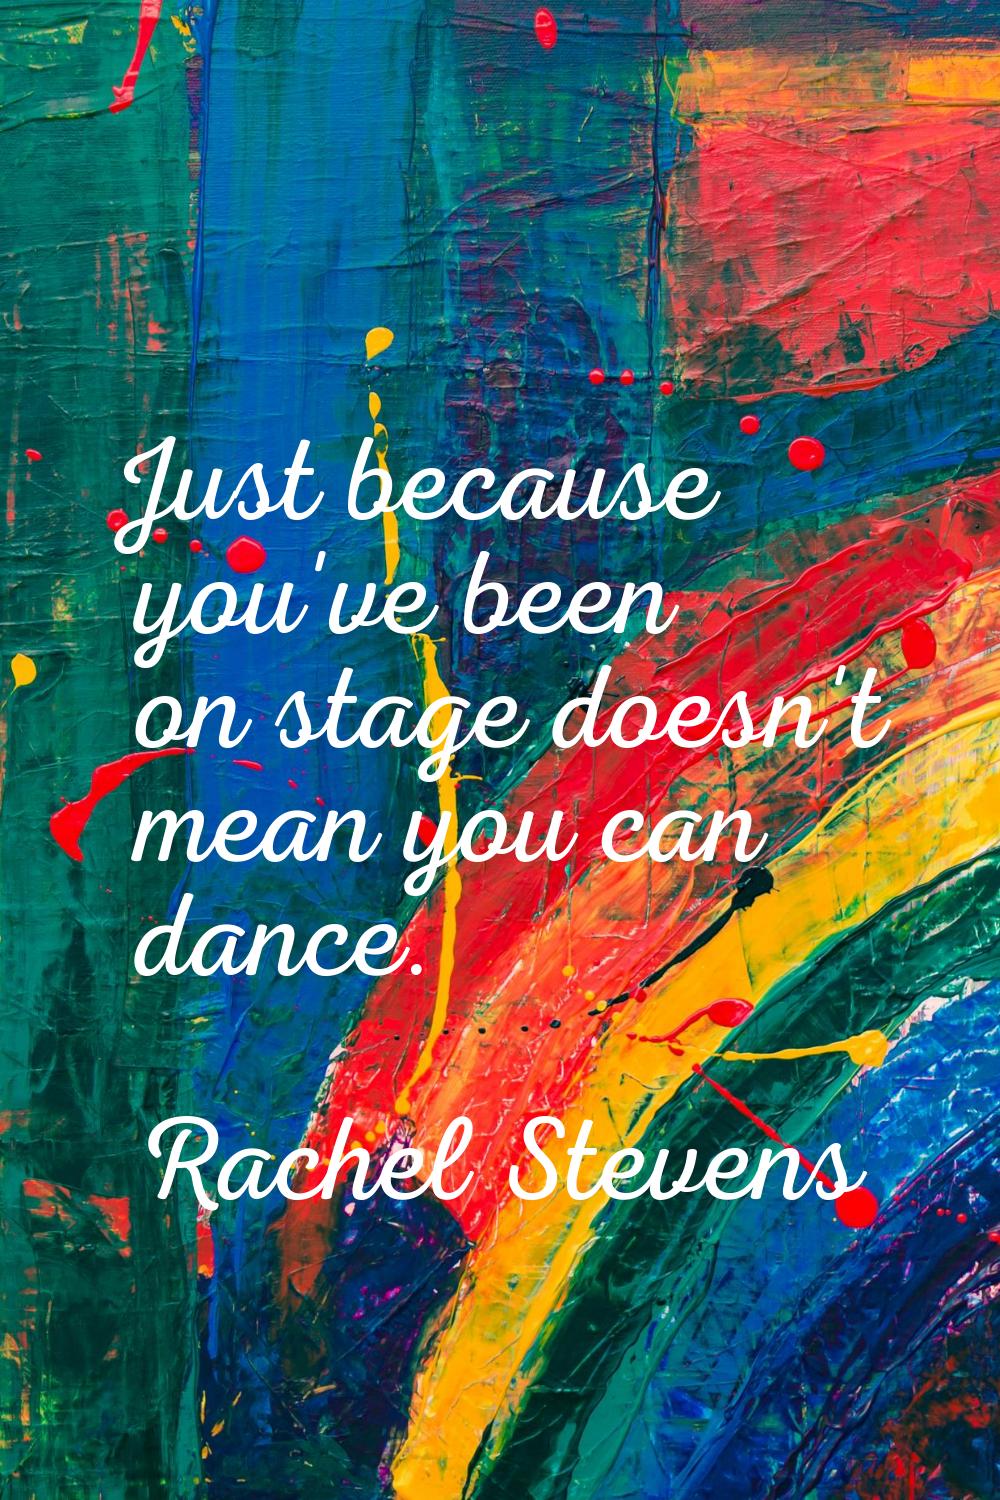 Just because you've been on stage doesn't mean you can dance.